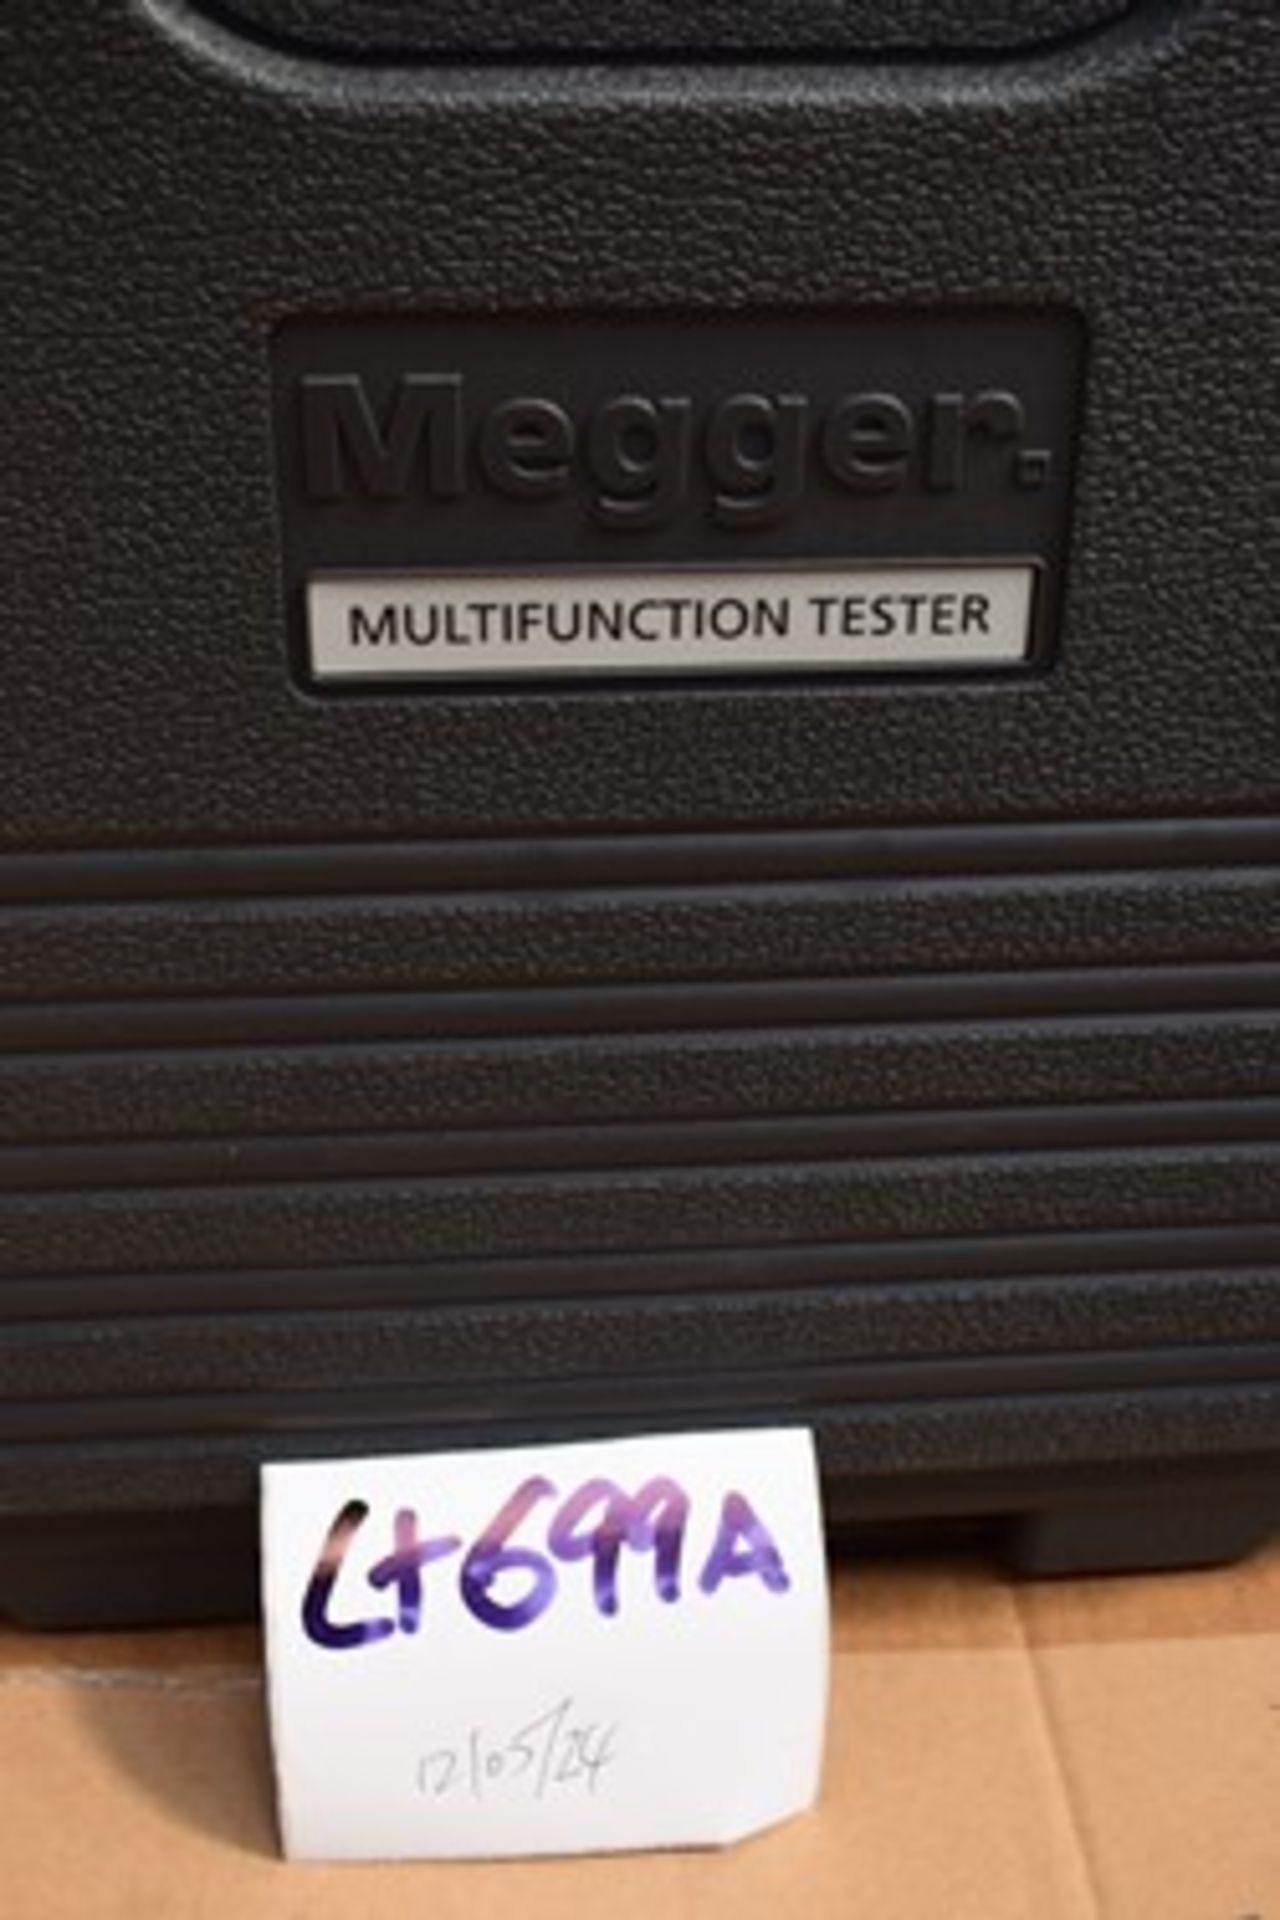 1 x Megger multifunction electric tester, Model MFT1711 with hard case and certificate of in calibra - Image 5 of 5